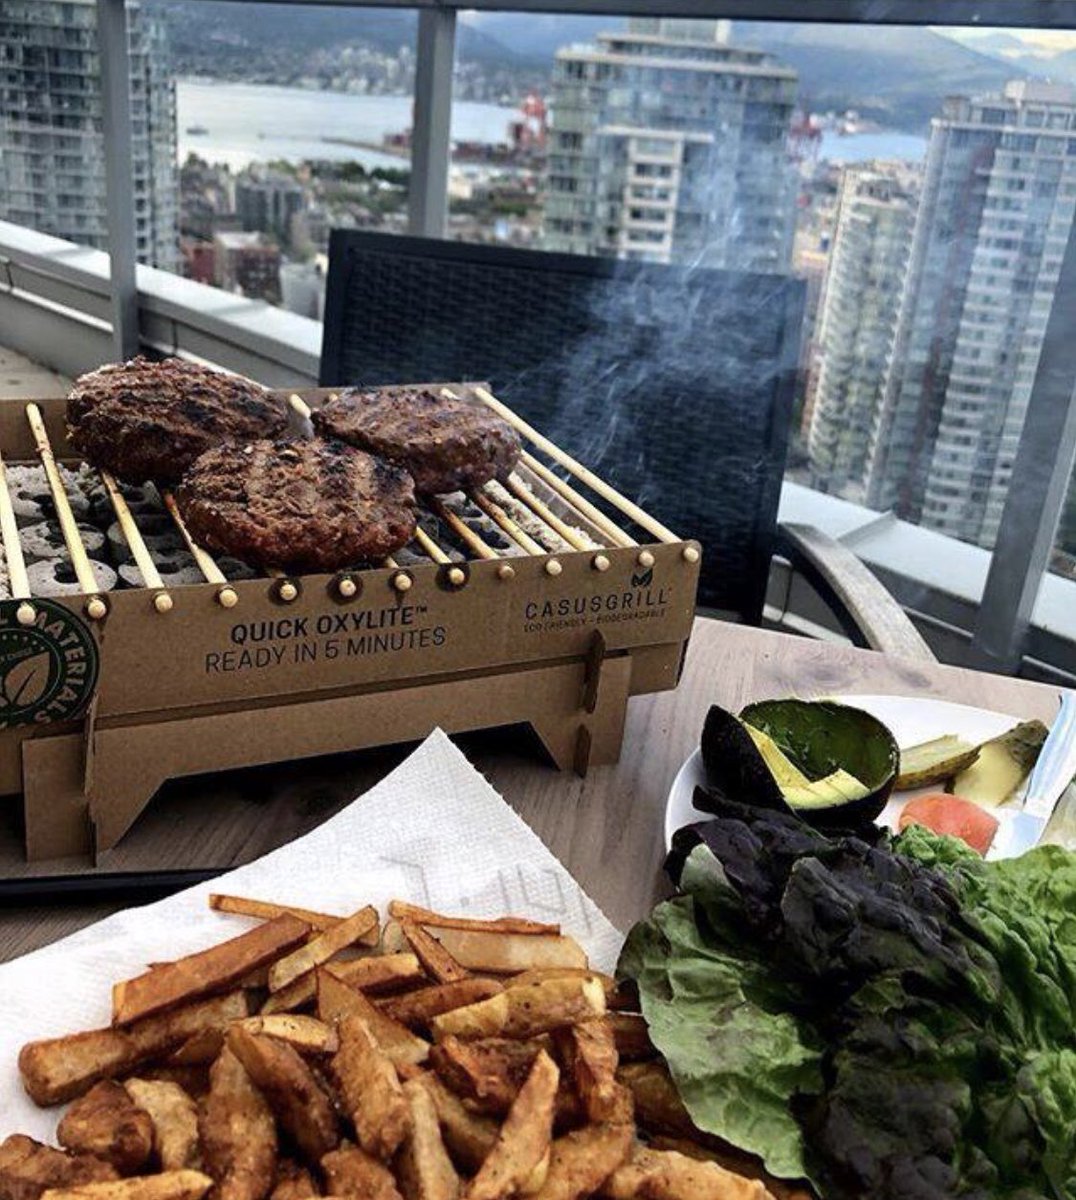 Make your own burger on @casusgrilltm. 🍔 🥗🥑🍅

#sustainable #grillgreen #grilling #grill #onetimeuse #portablegrill #bamboogrill #simplyadventure #lifeofadventure #weloveit #liveoutdoors #bbq #wherewillwegonext #greenliving #stayandwander #goexplore #lovelifeoutside